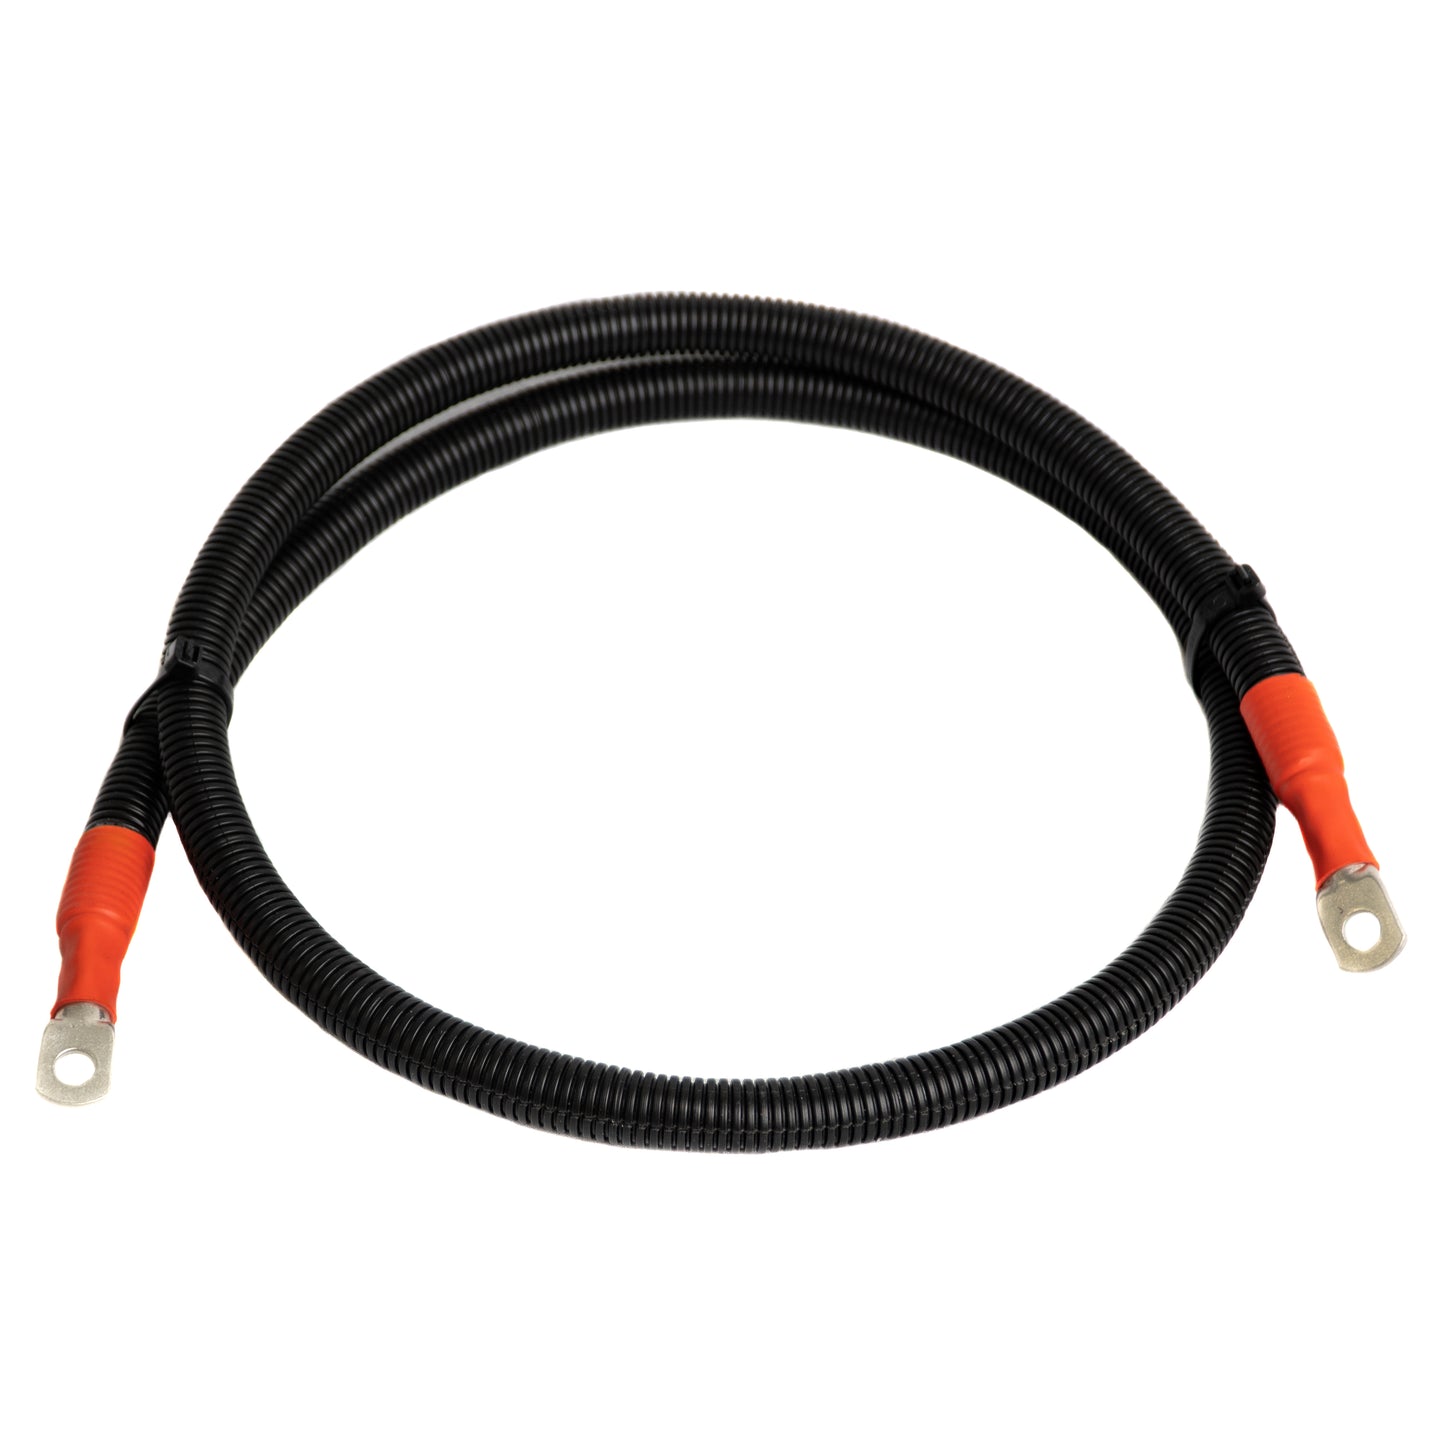 Lithium Dual Battery Cable Kit to suit N80 Hilux